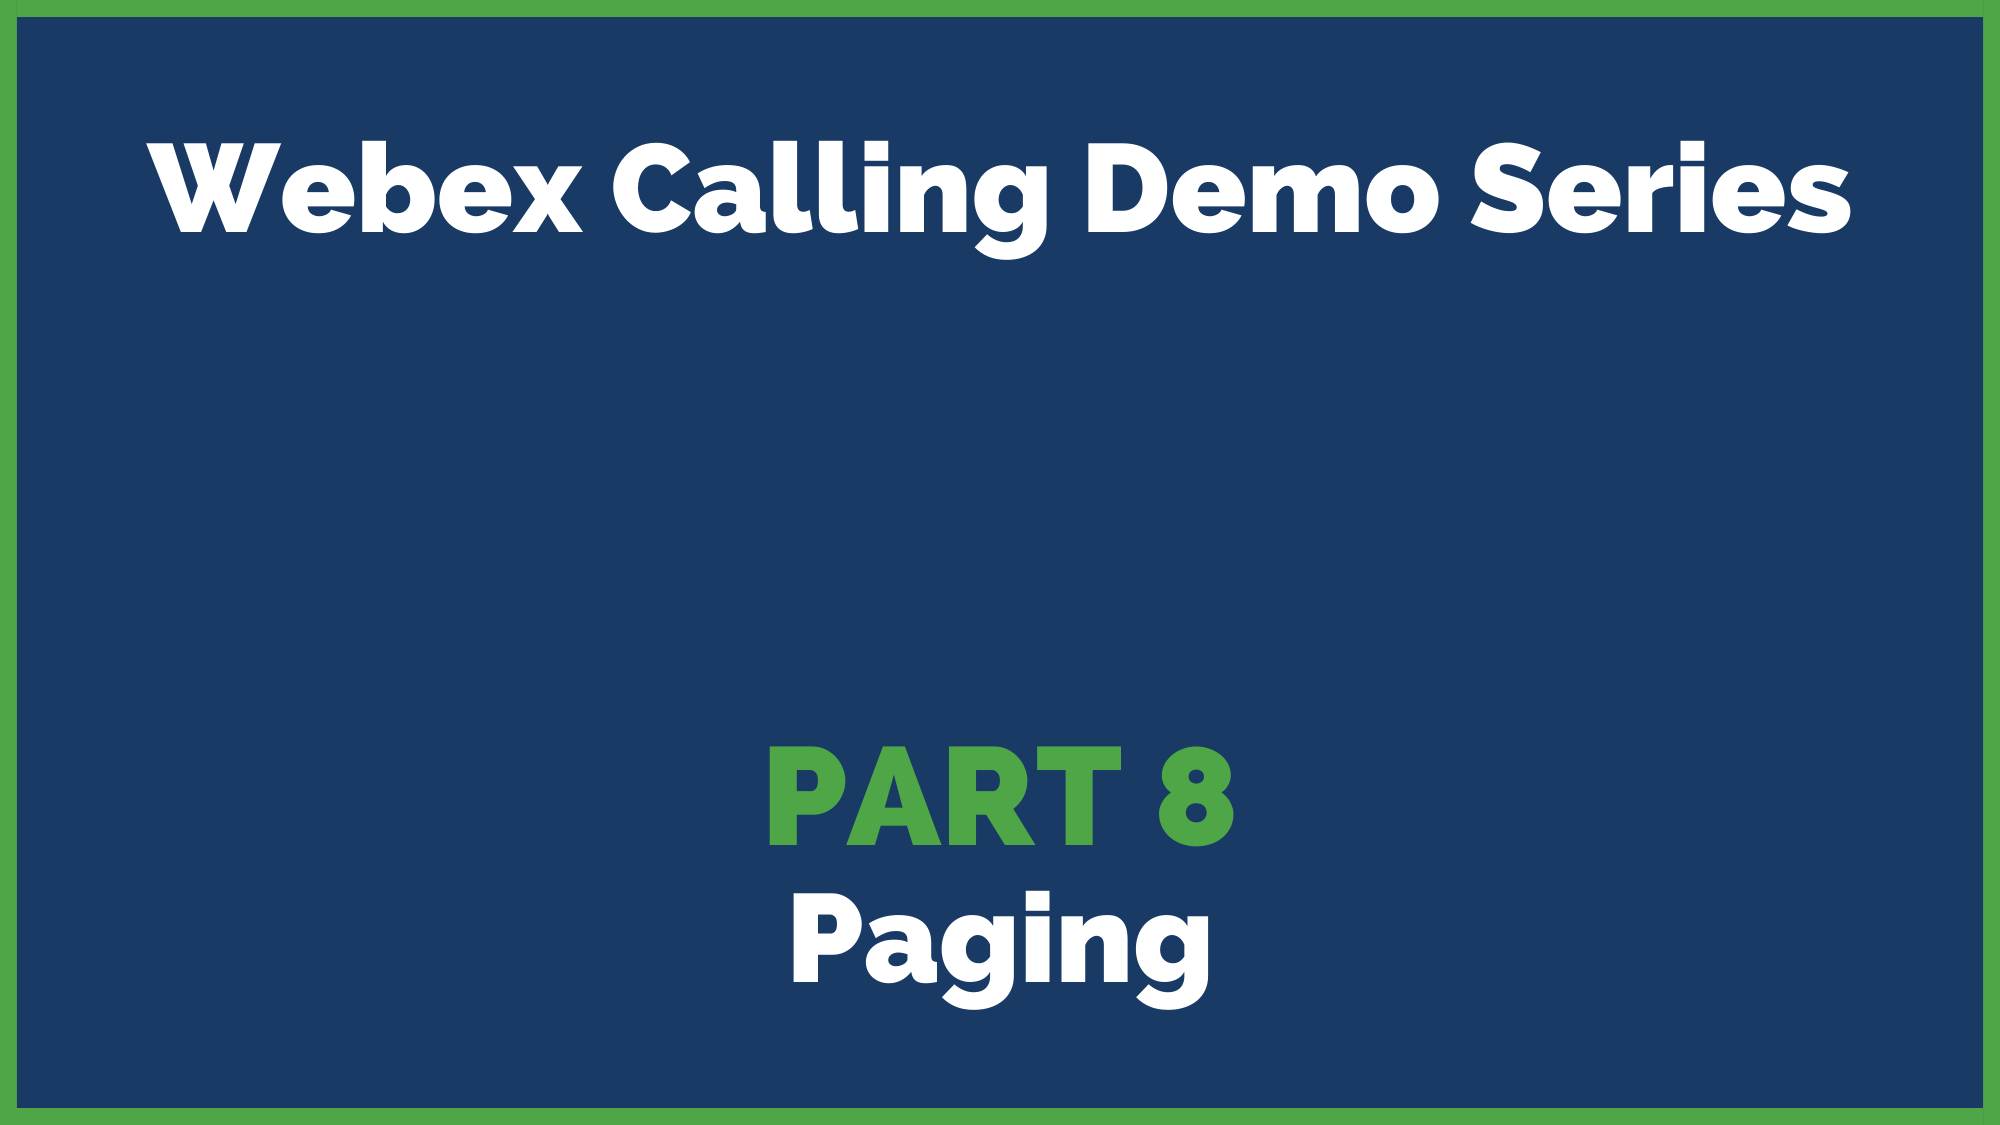 2022 Webex Calling Demo Series Part 8: Paging